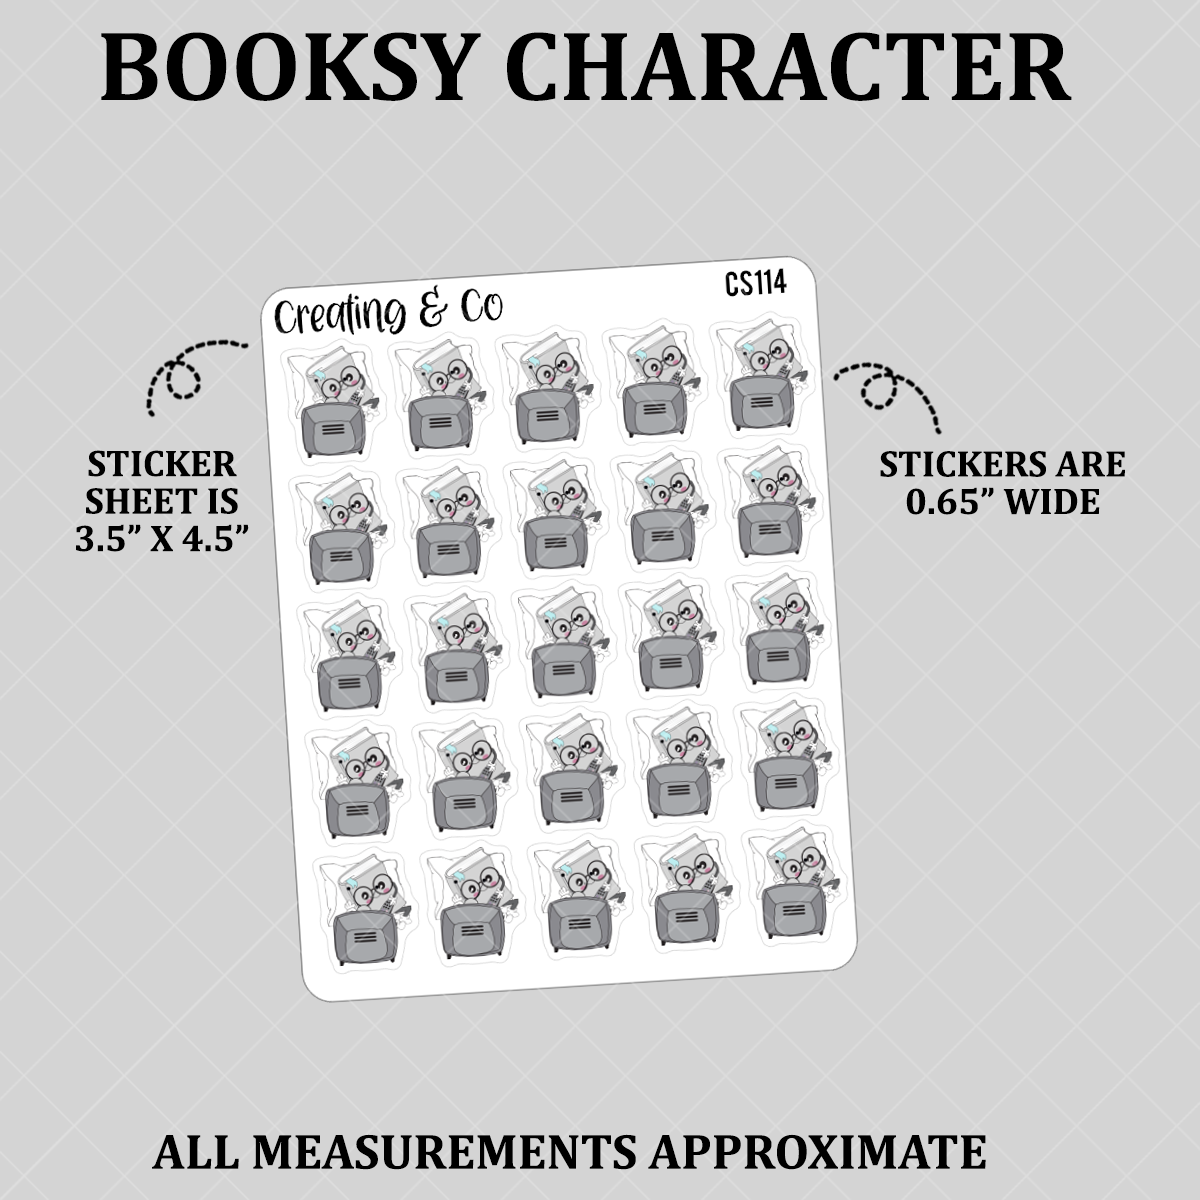 Watching TV Booksy Character Functional Stickers - CS114